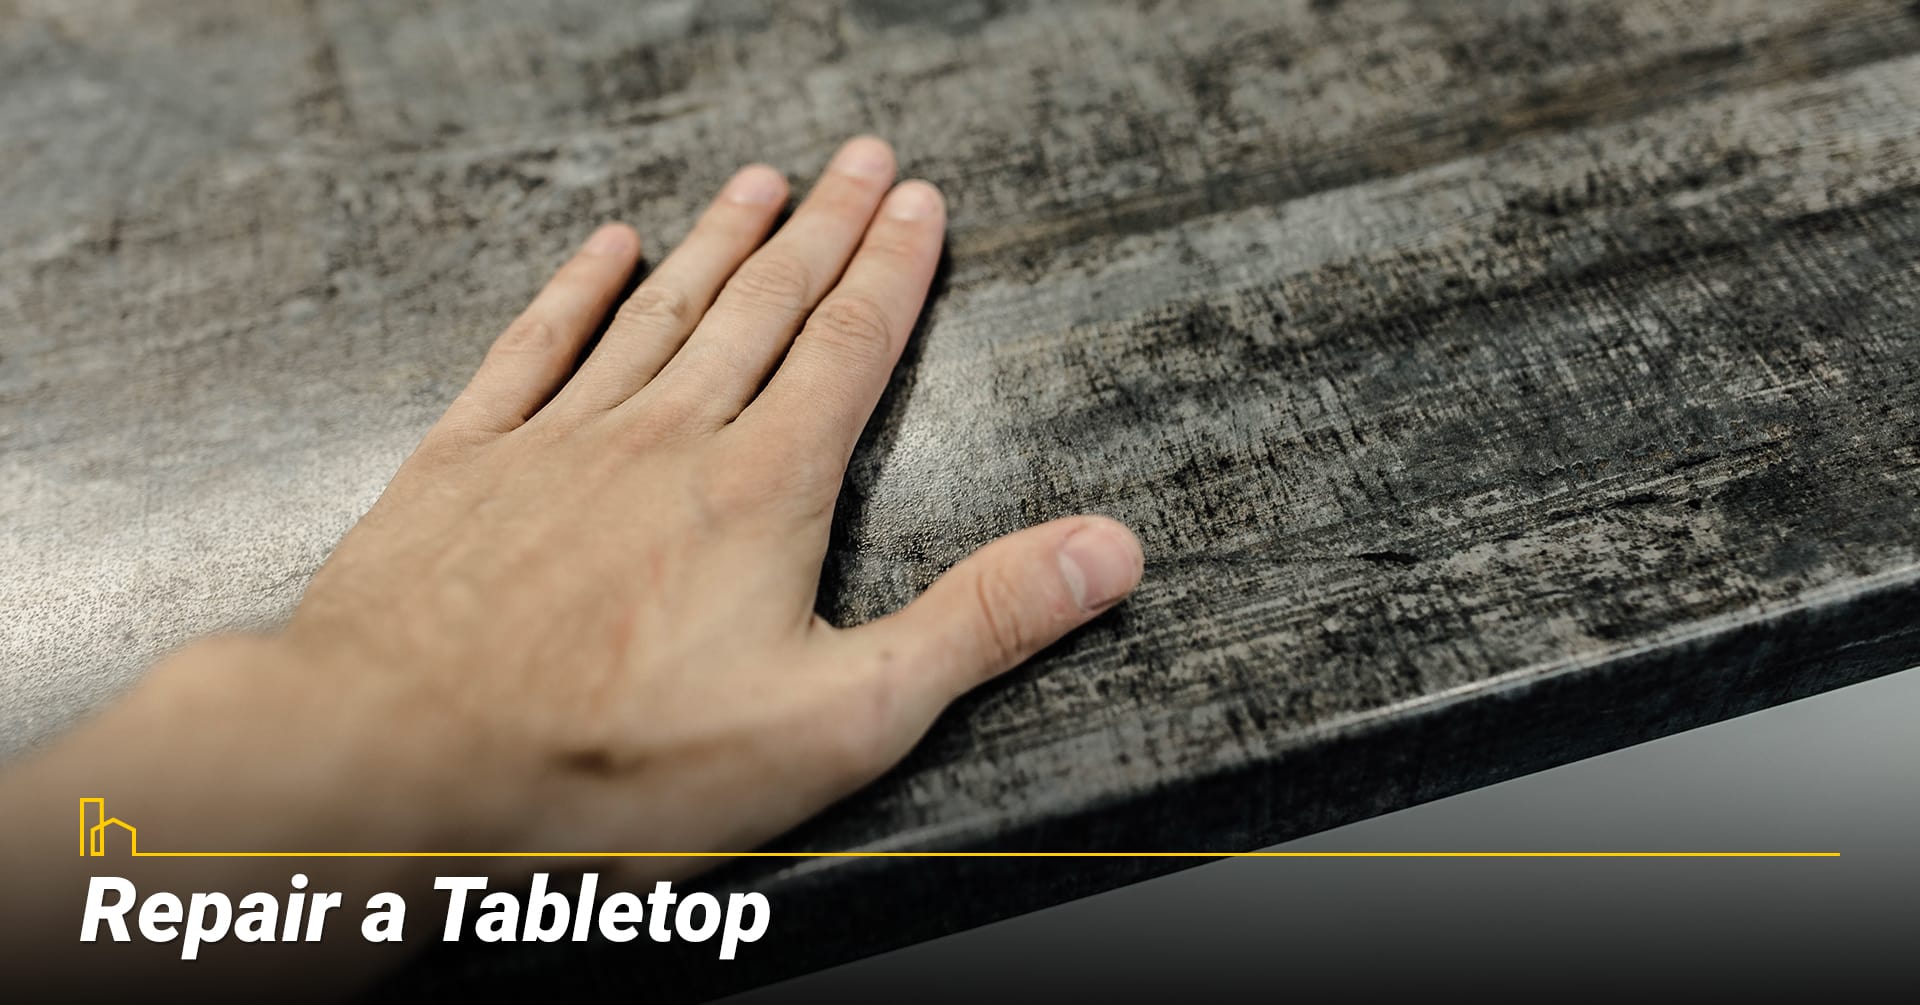 Repair a Tabletop, fix your table